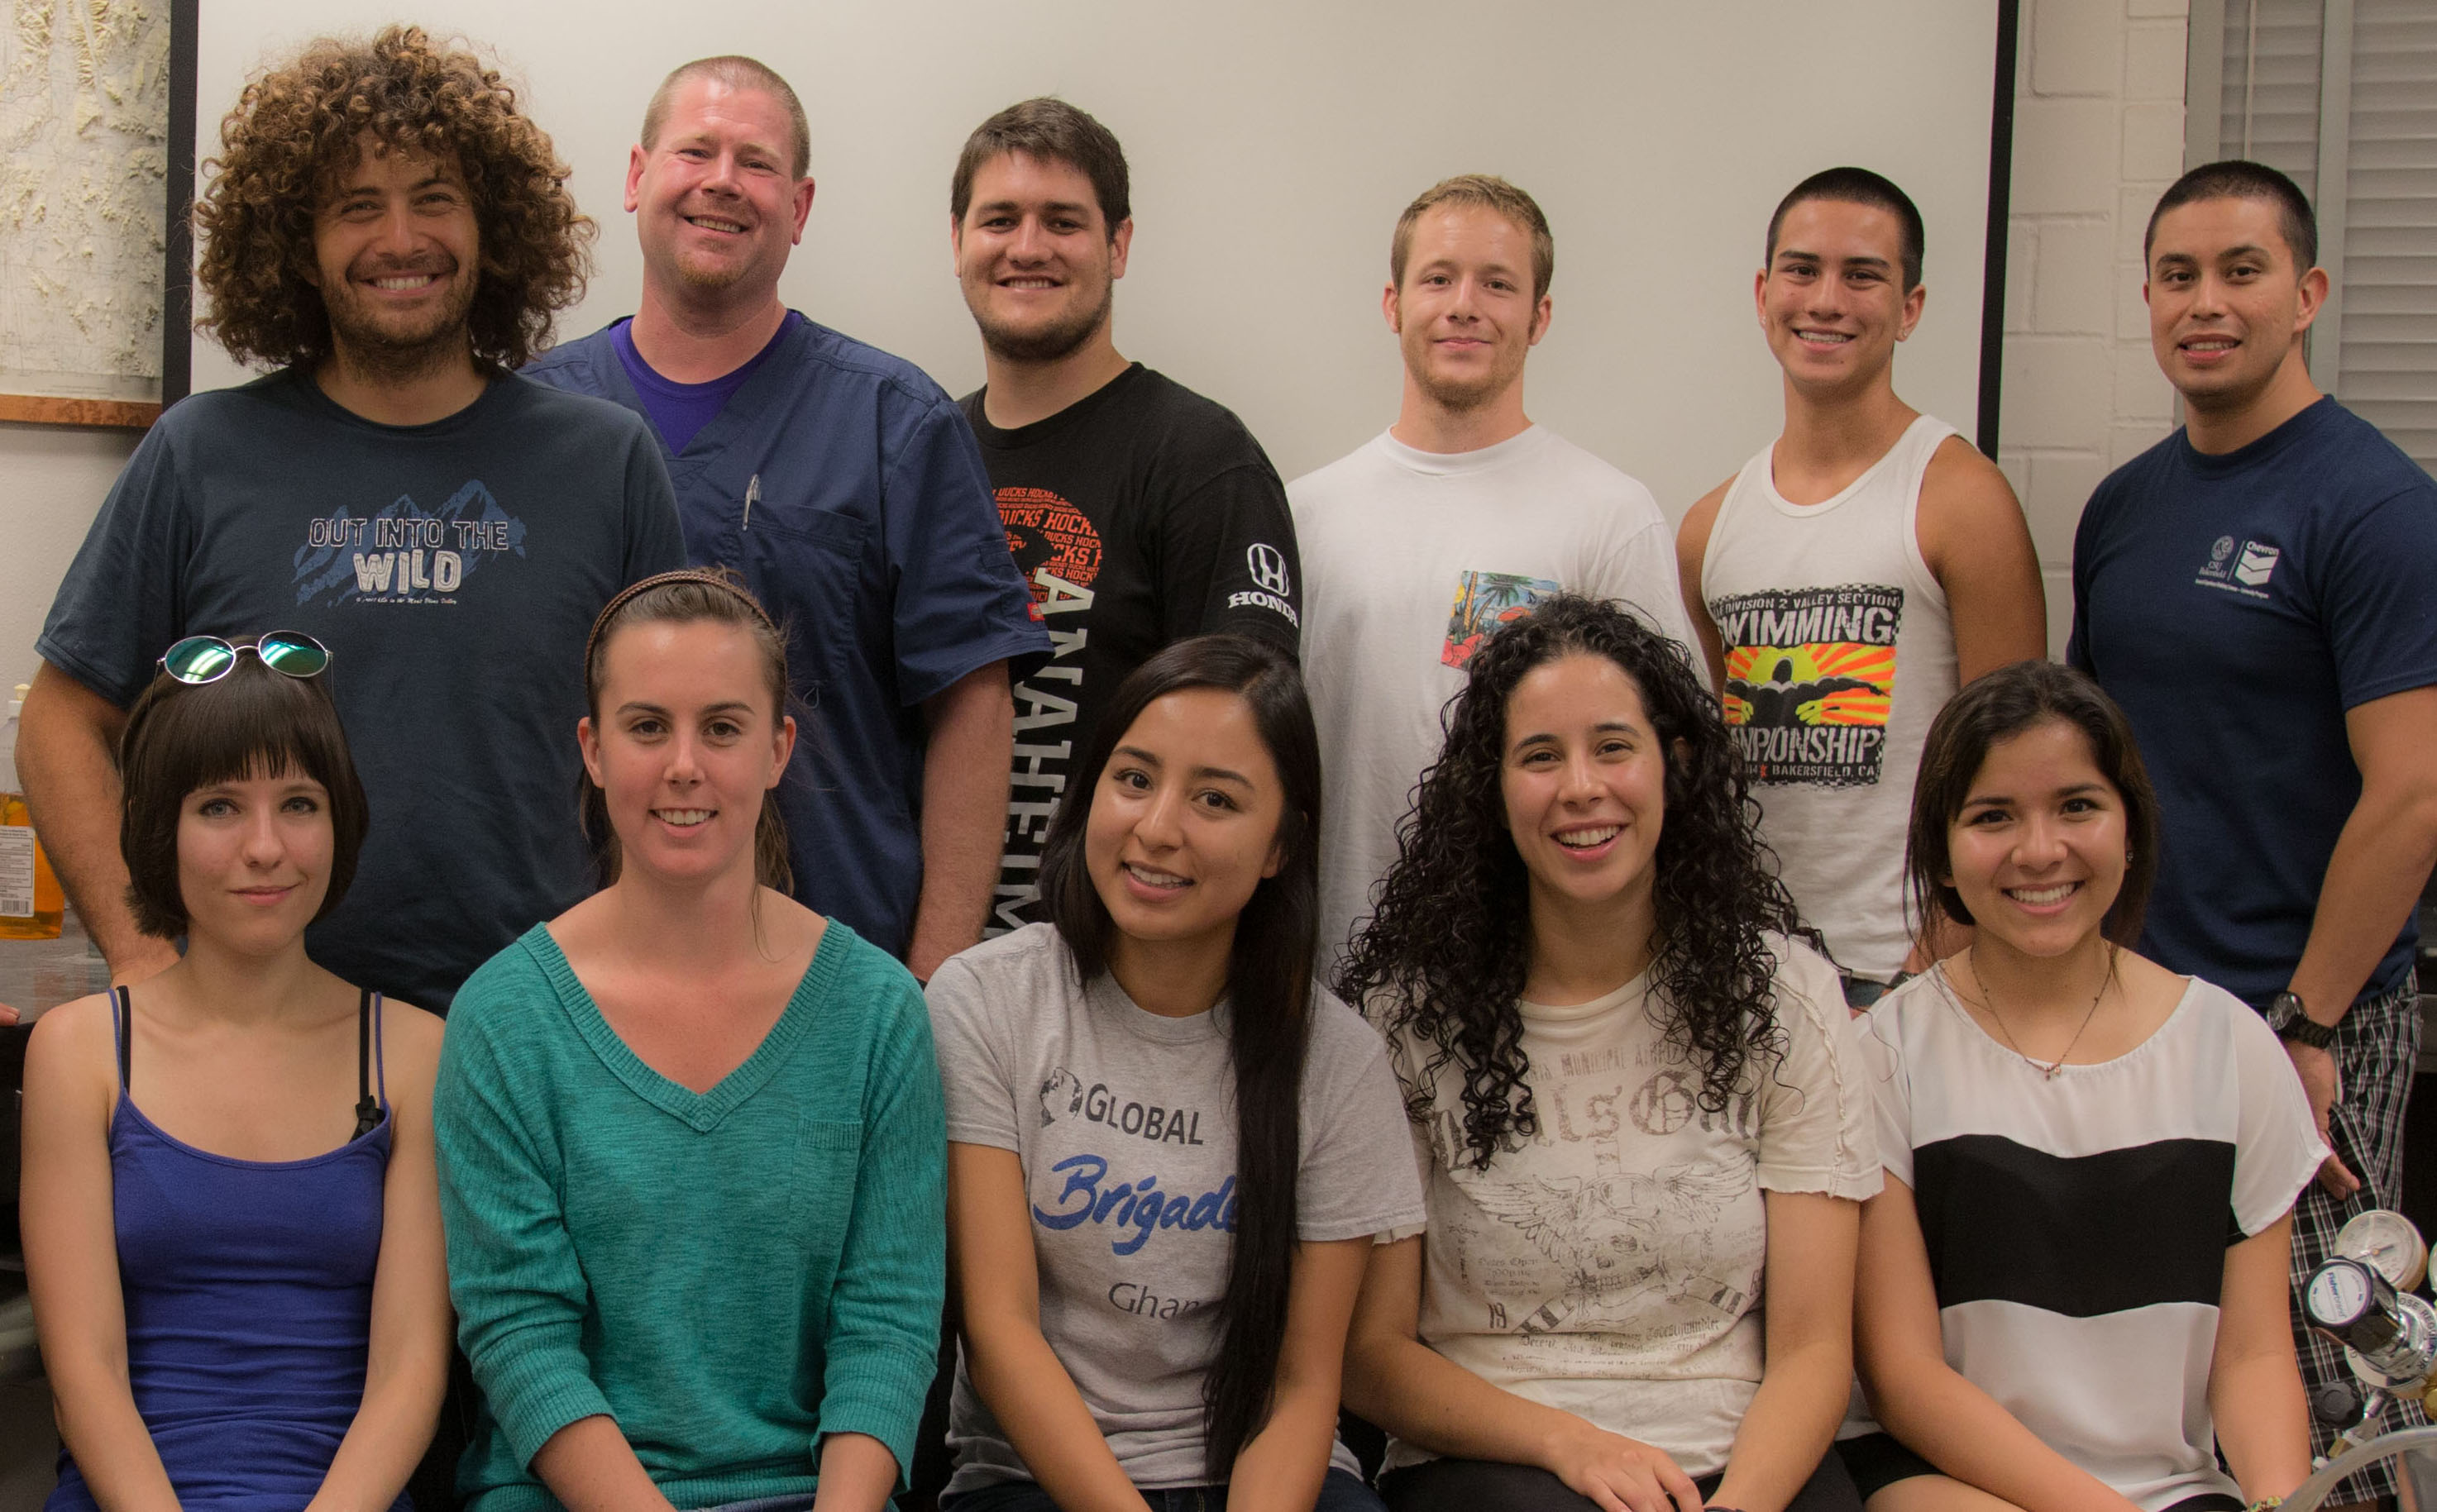 Jacobsen and Pratt lab students in summer 2014 with REVS-UP